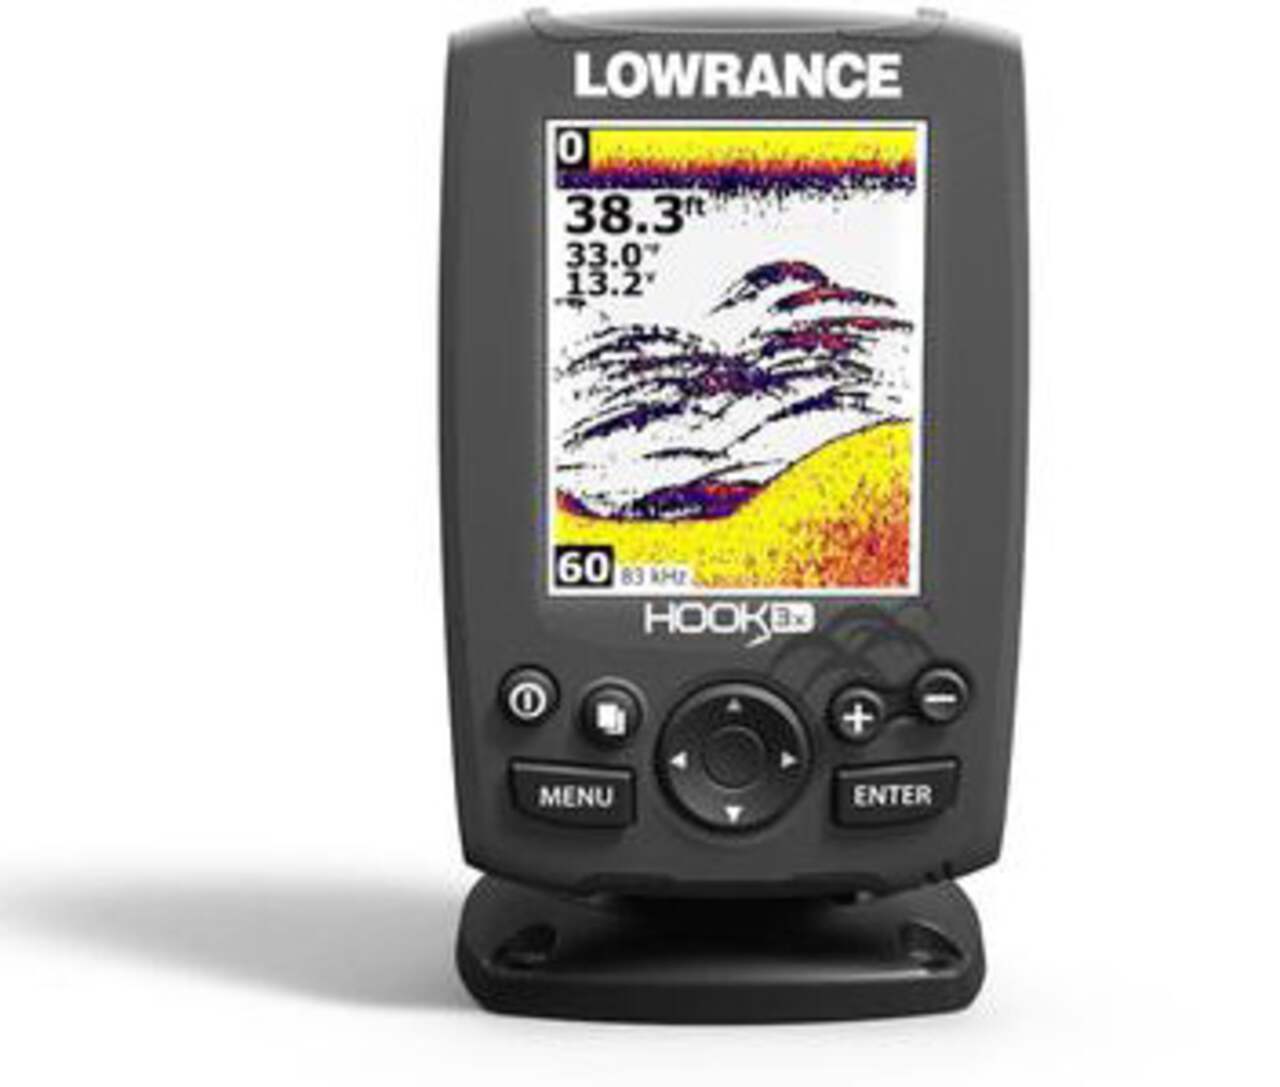 https://media-www.canadiantire.ca/product/playing/fishing/fishing-equipment/0775782/lowrance-hook-3x-fish-finder-074aceb7-44ed-41f9-98aa-106410b34a51.png?imdensity=1&imwidth=640&impolicy=mZoom